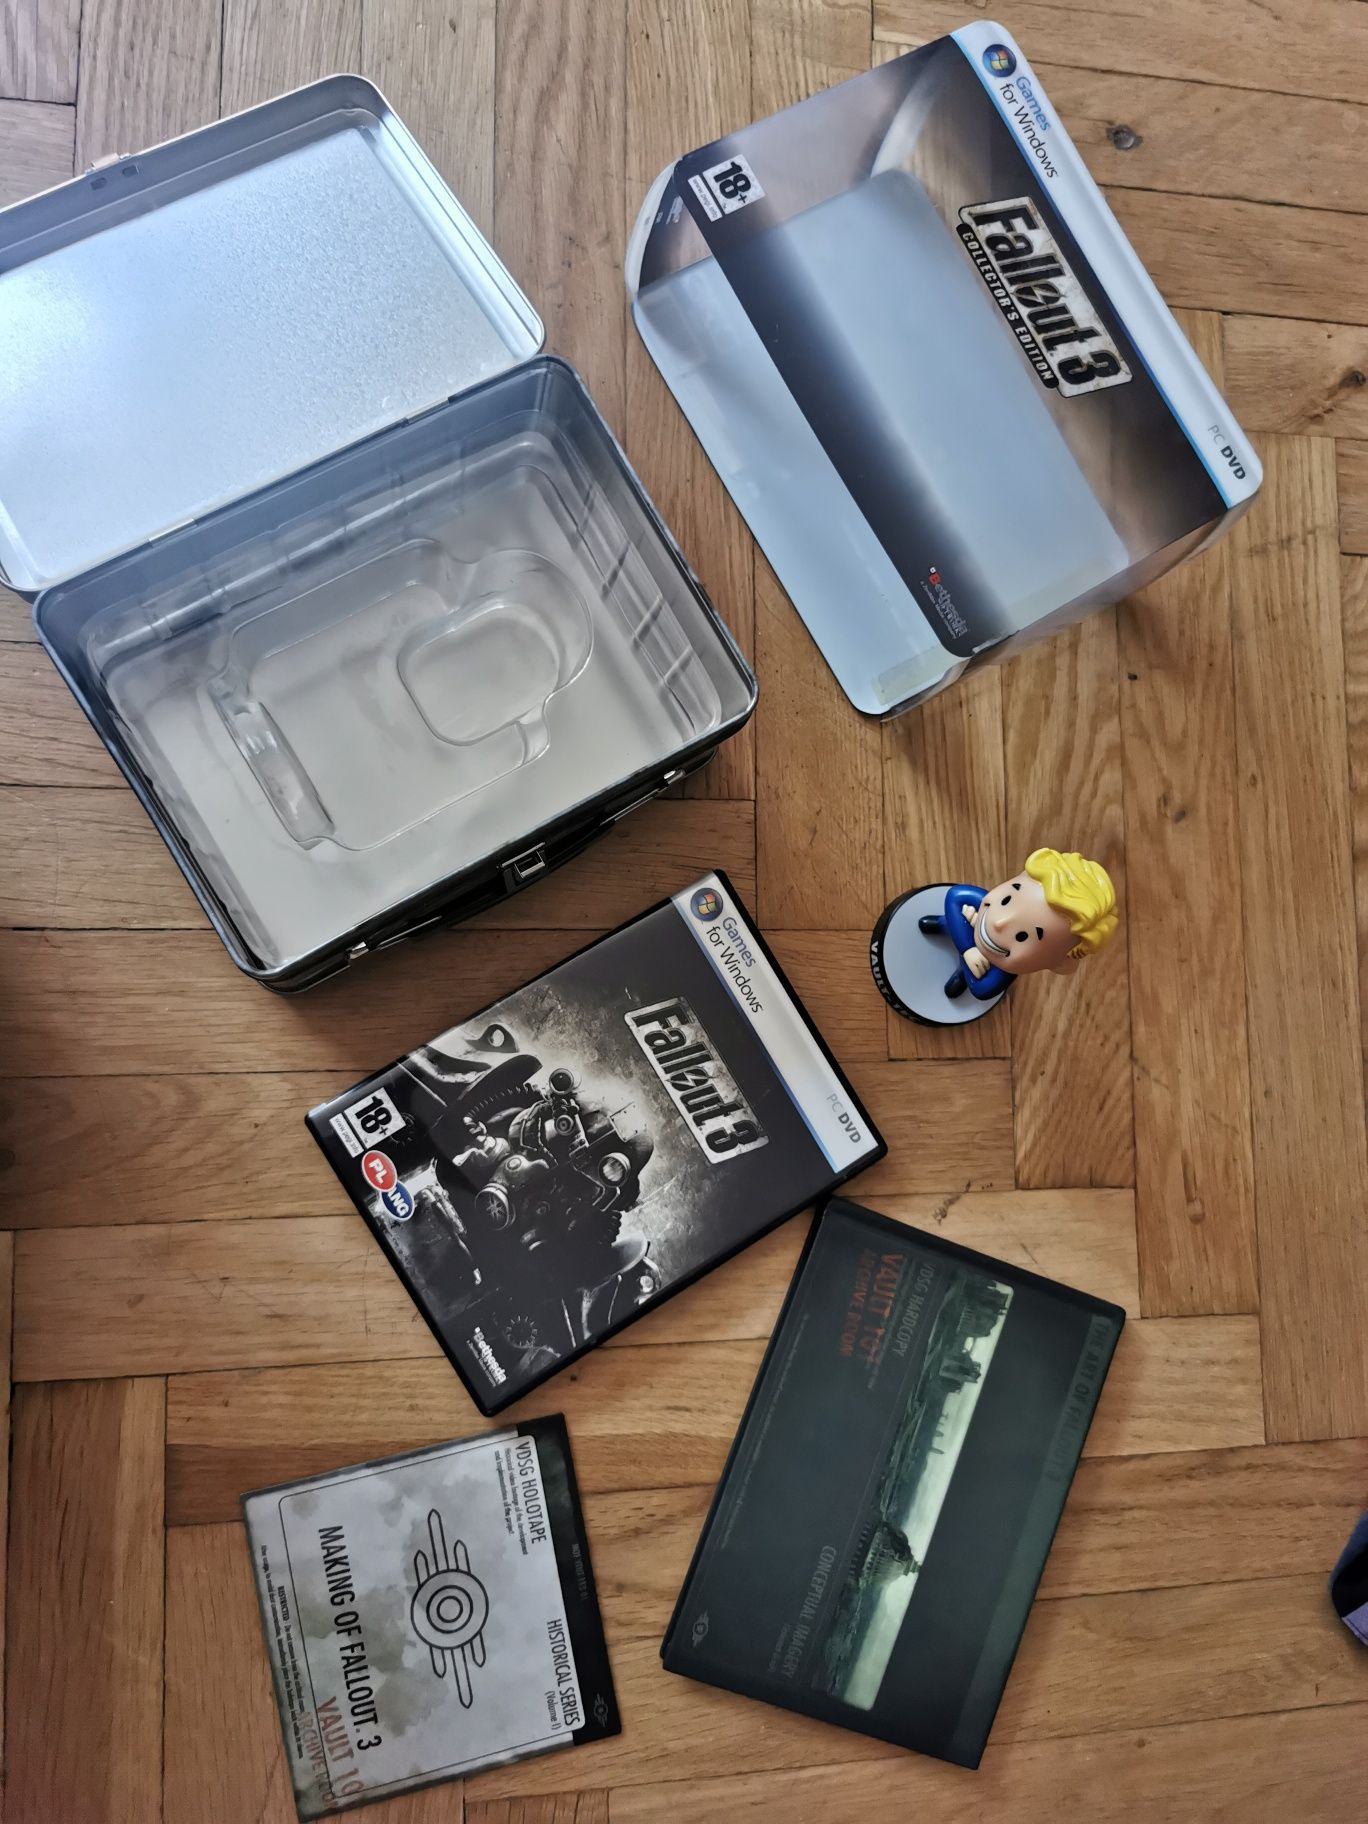 Fallout 3 collector's edition